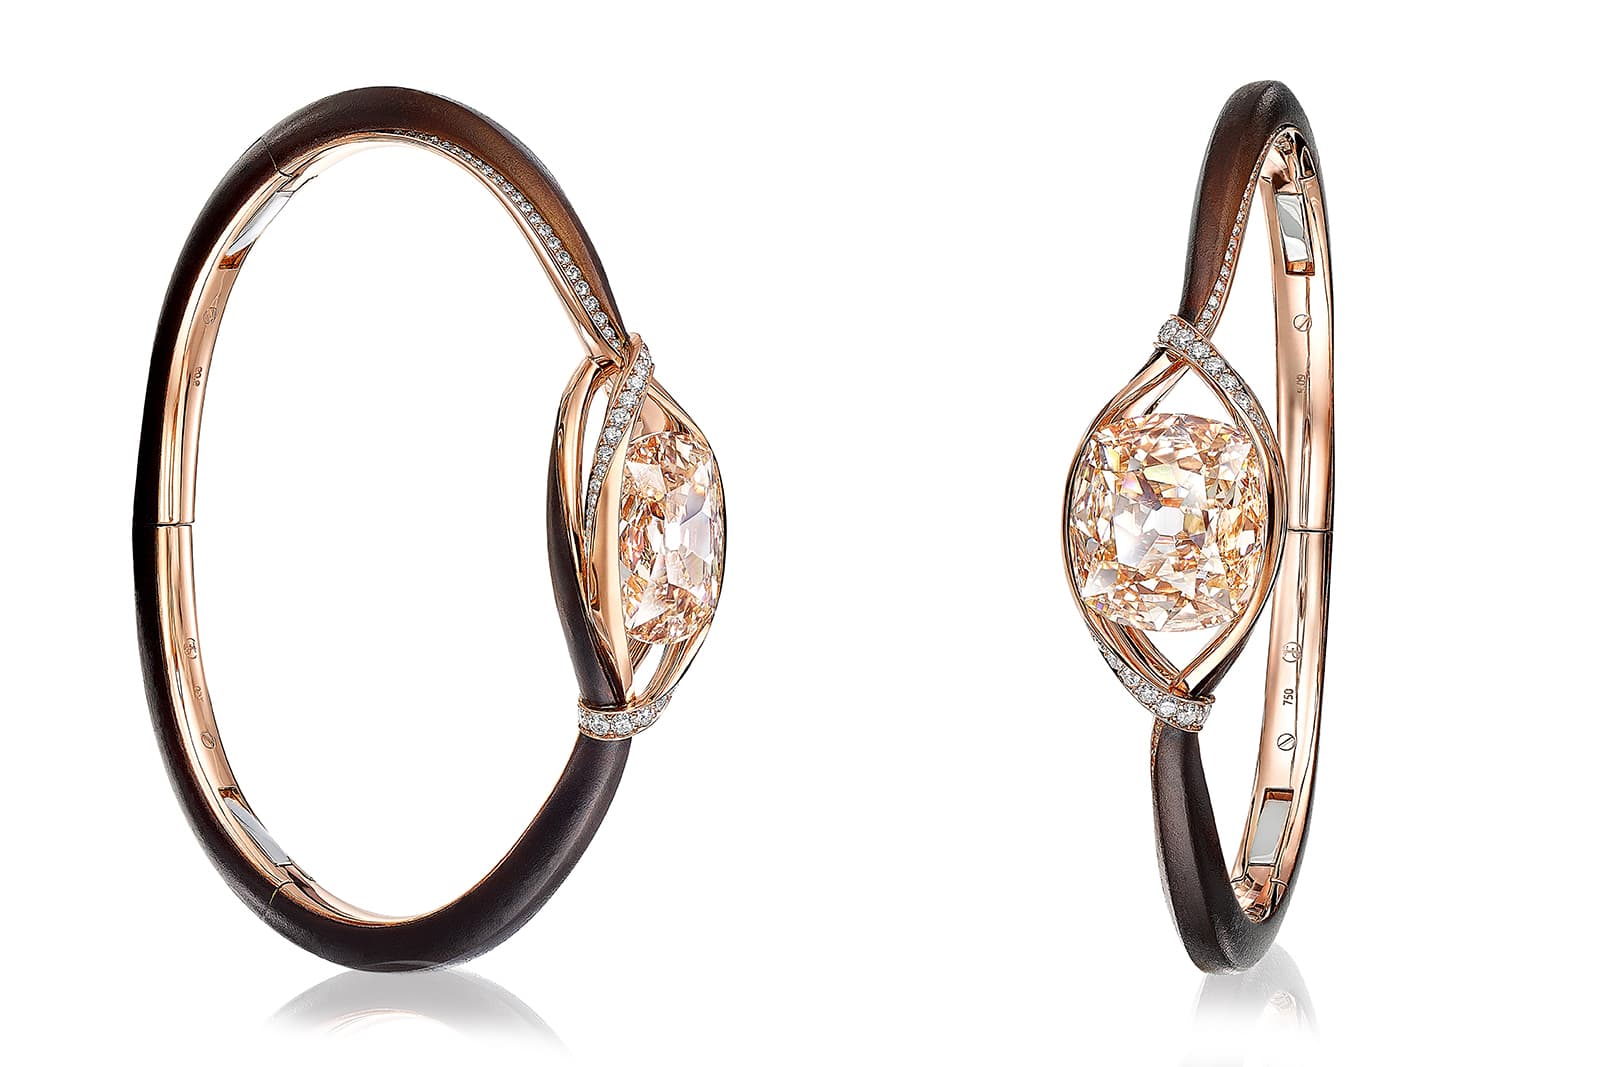 FORMS MUSE cushion-shaped diamond bangle in 18k rose gold and bronze, set with a 9.09 carat light brown diamond 